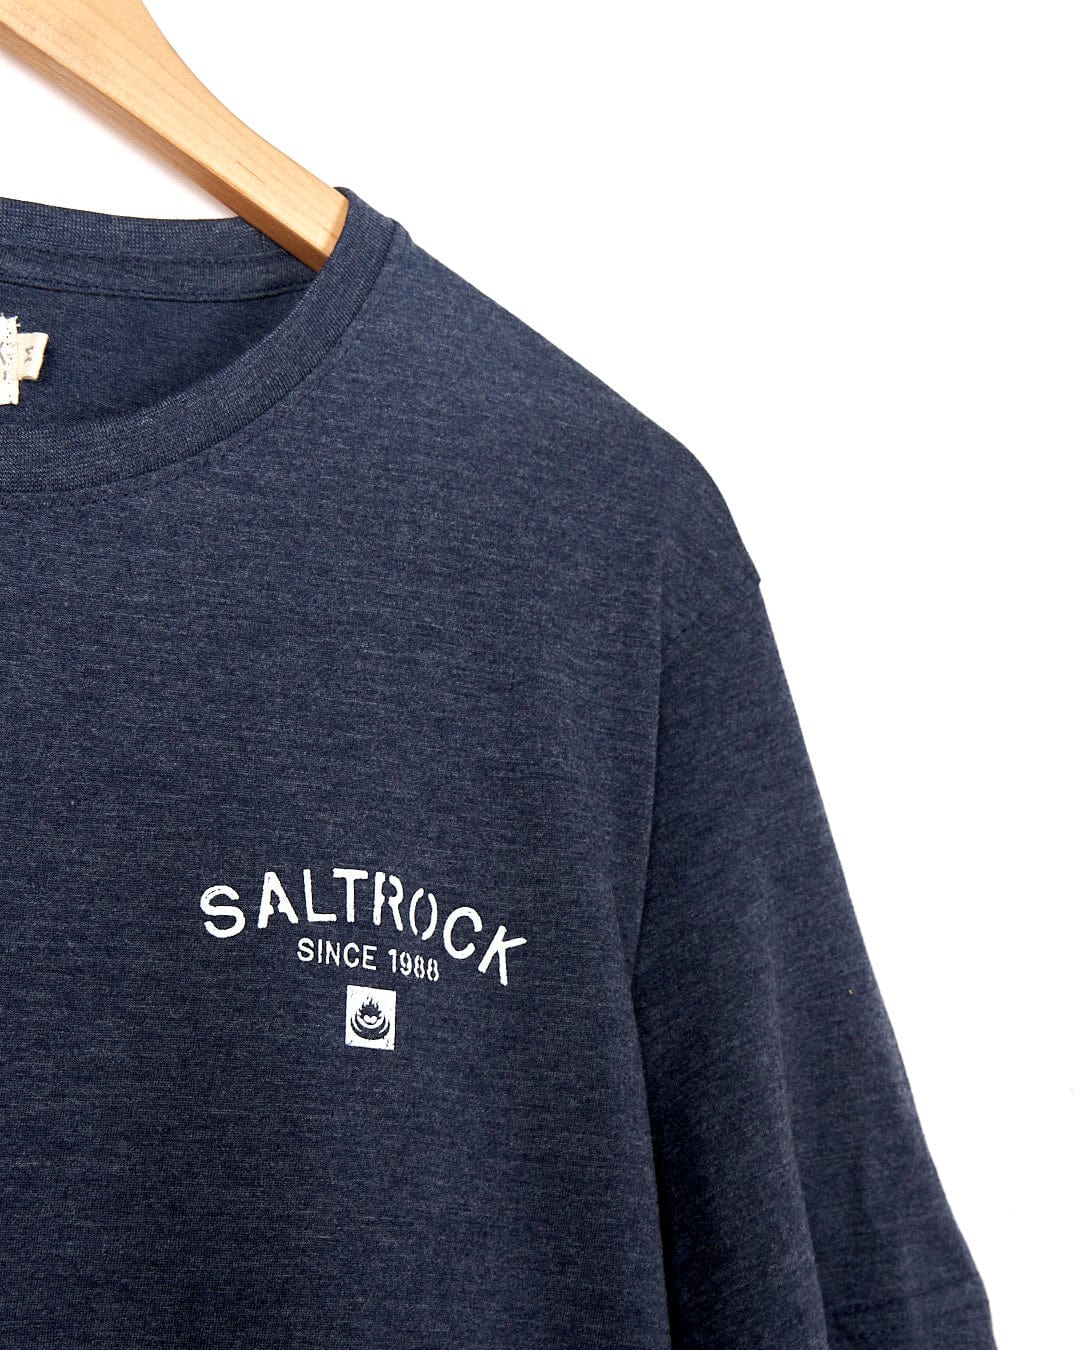 A navy Stencil - Mens Stencil T-Shirt - Dartmouth - Dress Blue with the word Saltrock on it.